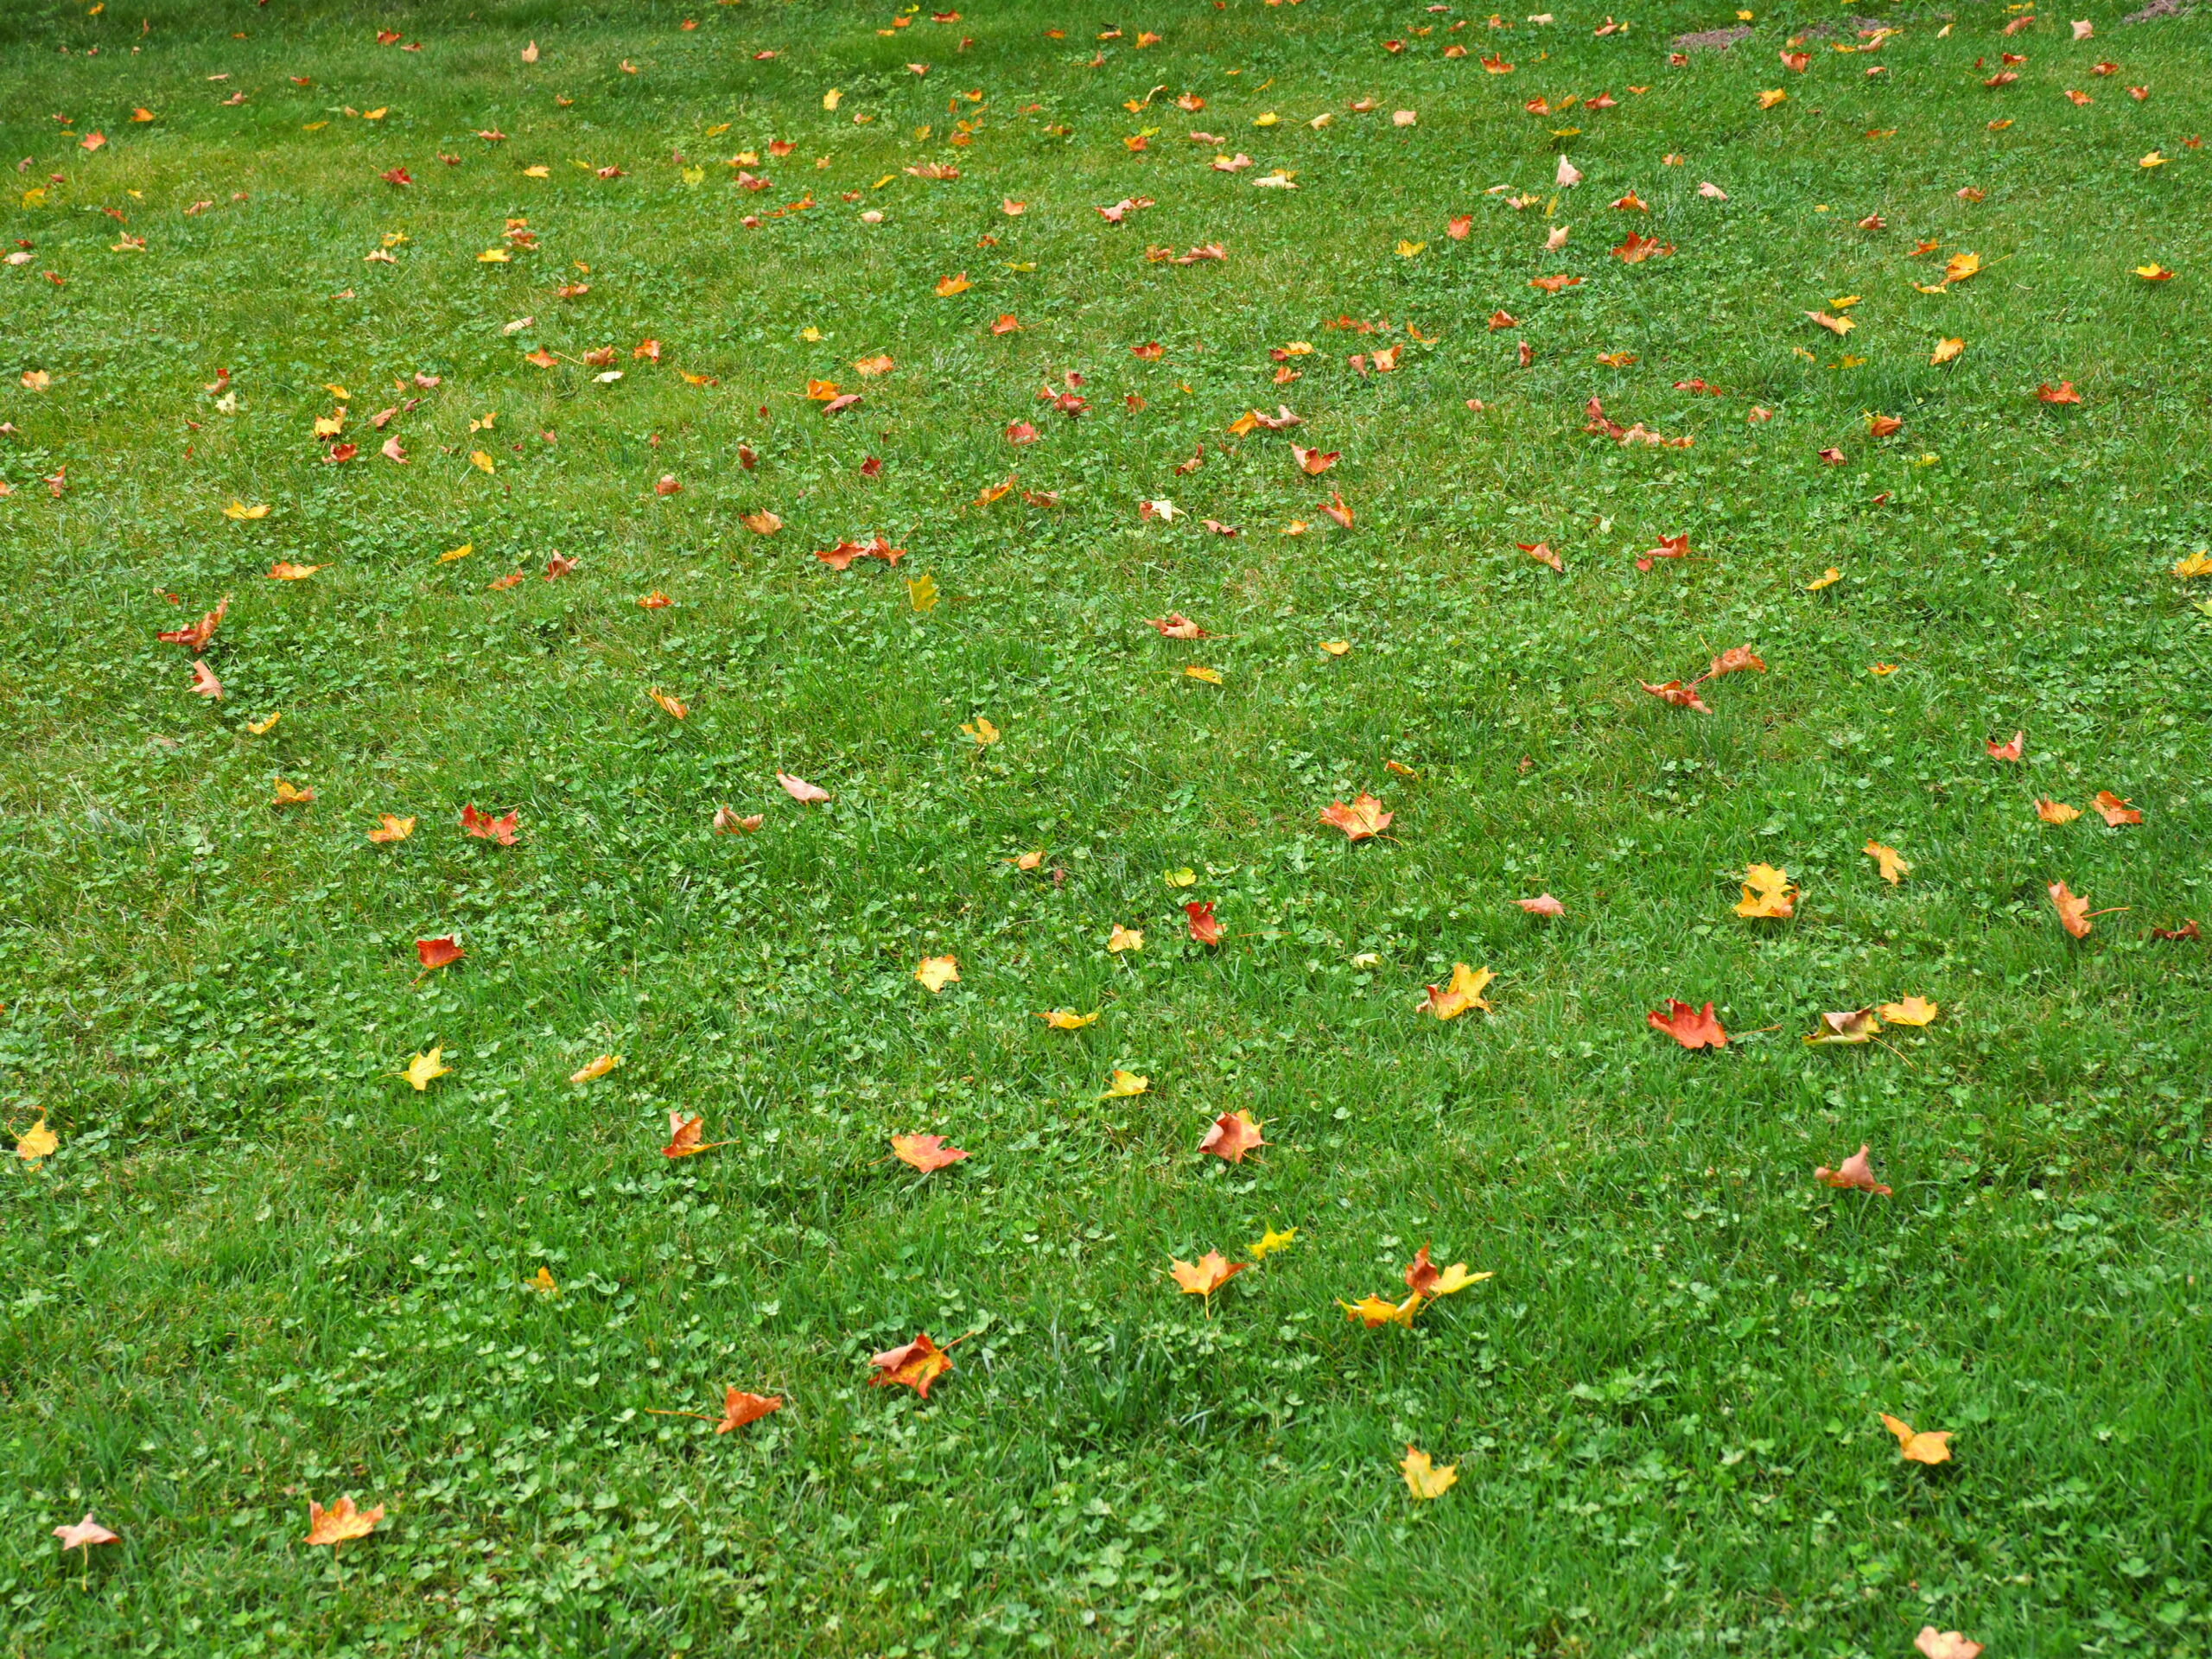 This scene of maple leaves on a lawn usually happens in October or November. This leafdrop shot was taken September 4. The drought is resulting in early leaf drop throughout Long Island, New England and the lower Hudson River Valley.
ANDREW MESSINGER